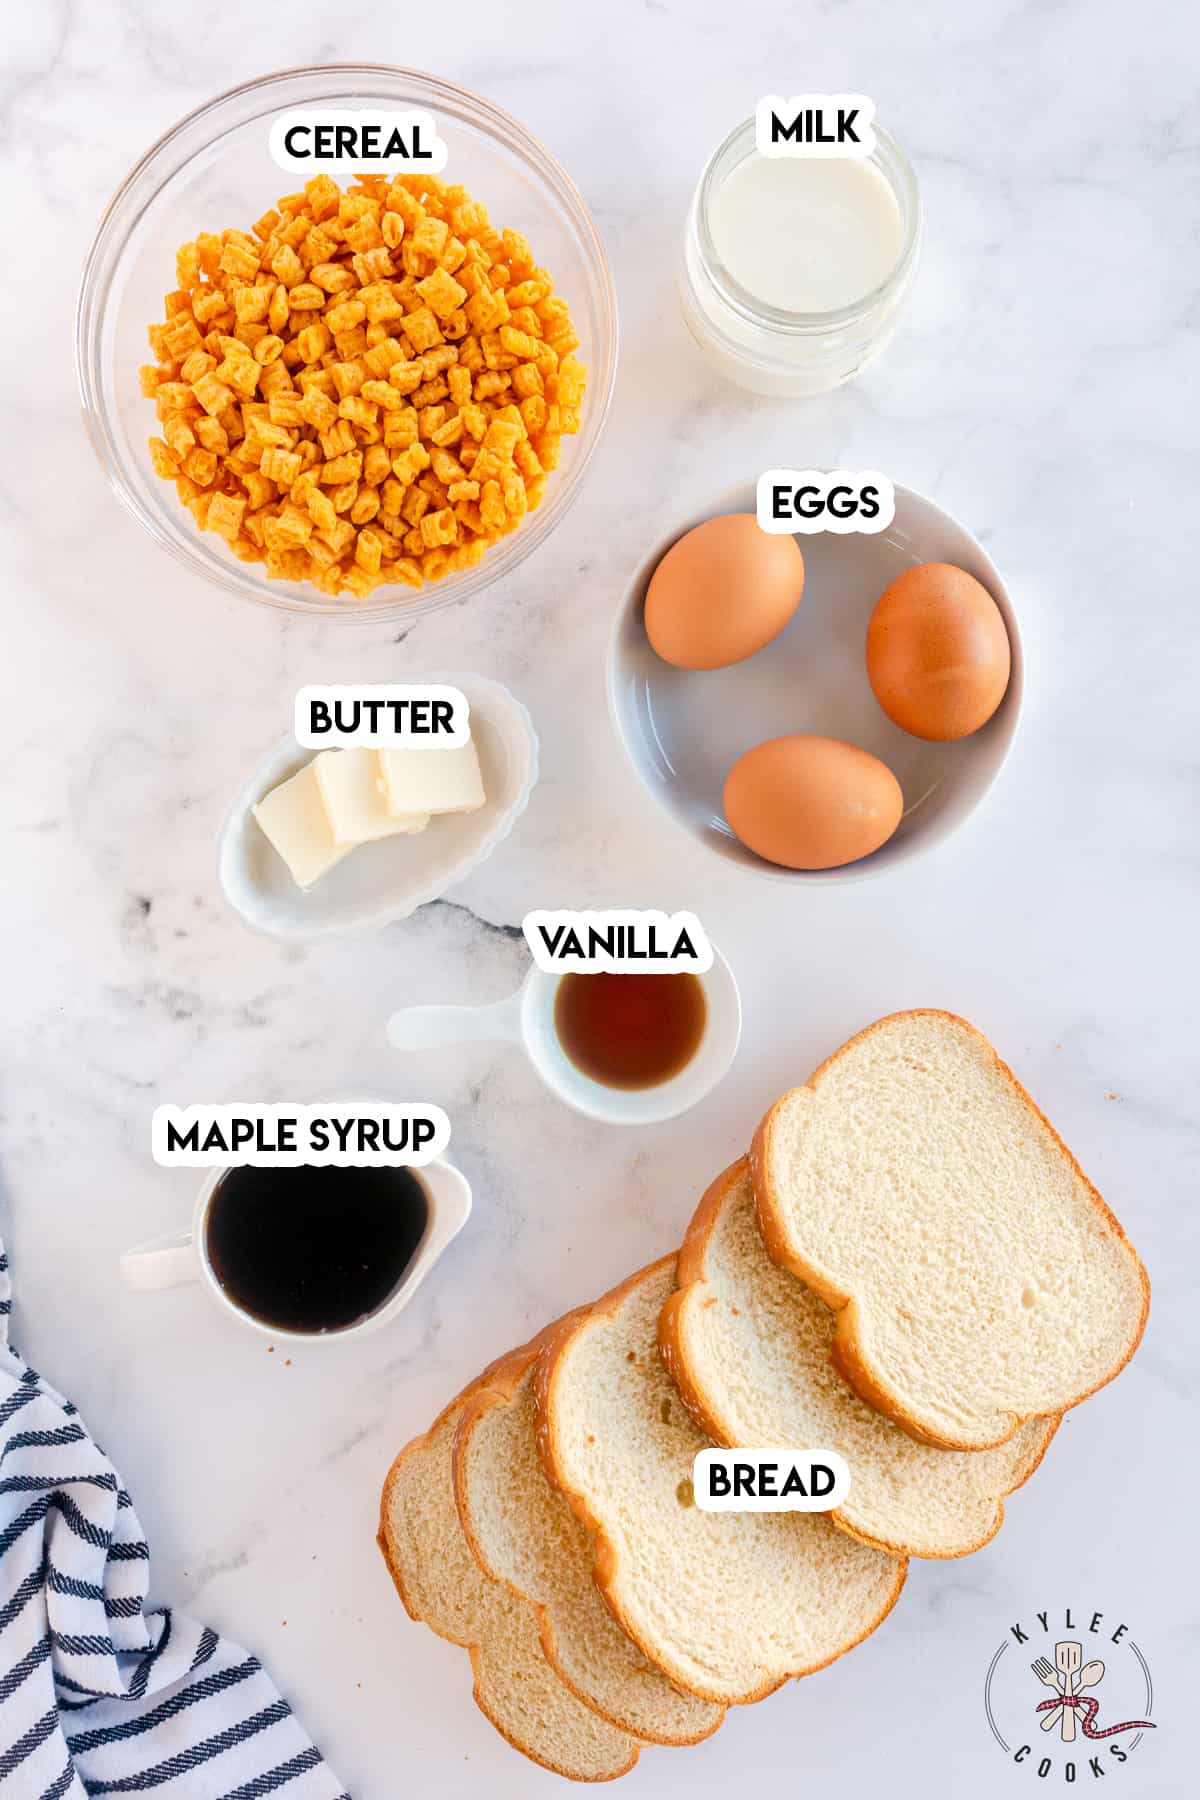 ingredients to make crunchy french toast laid out and labeled